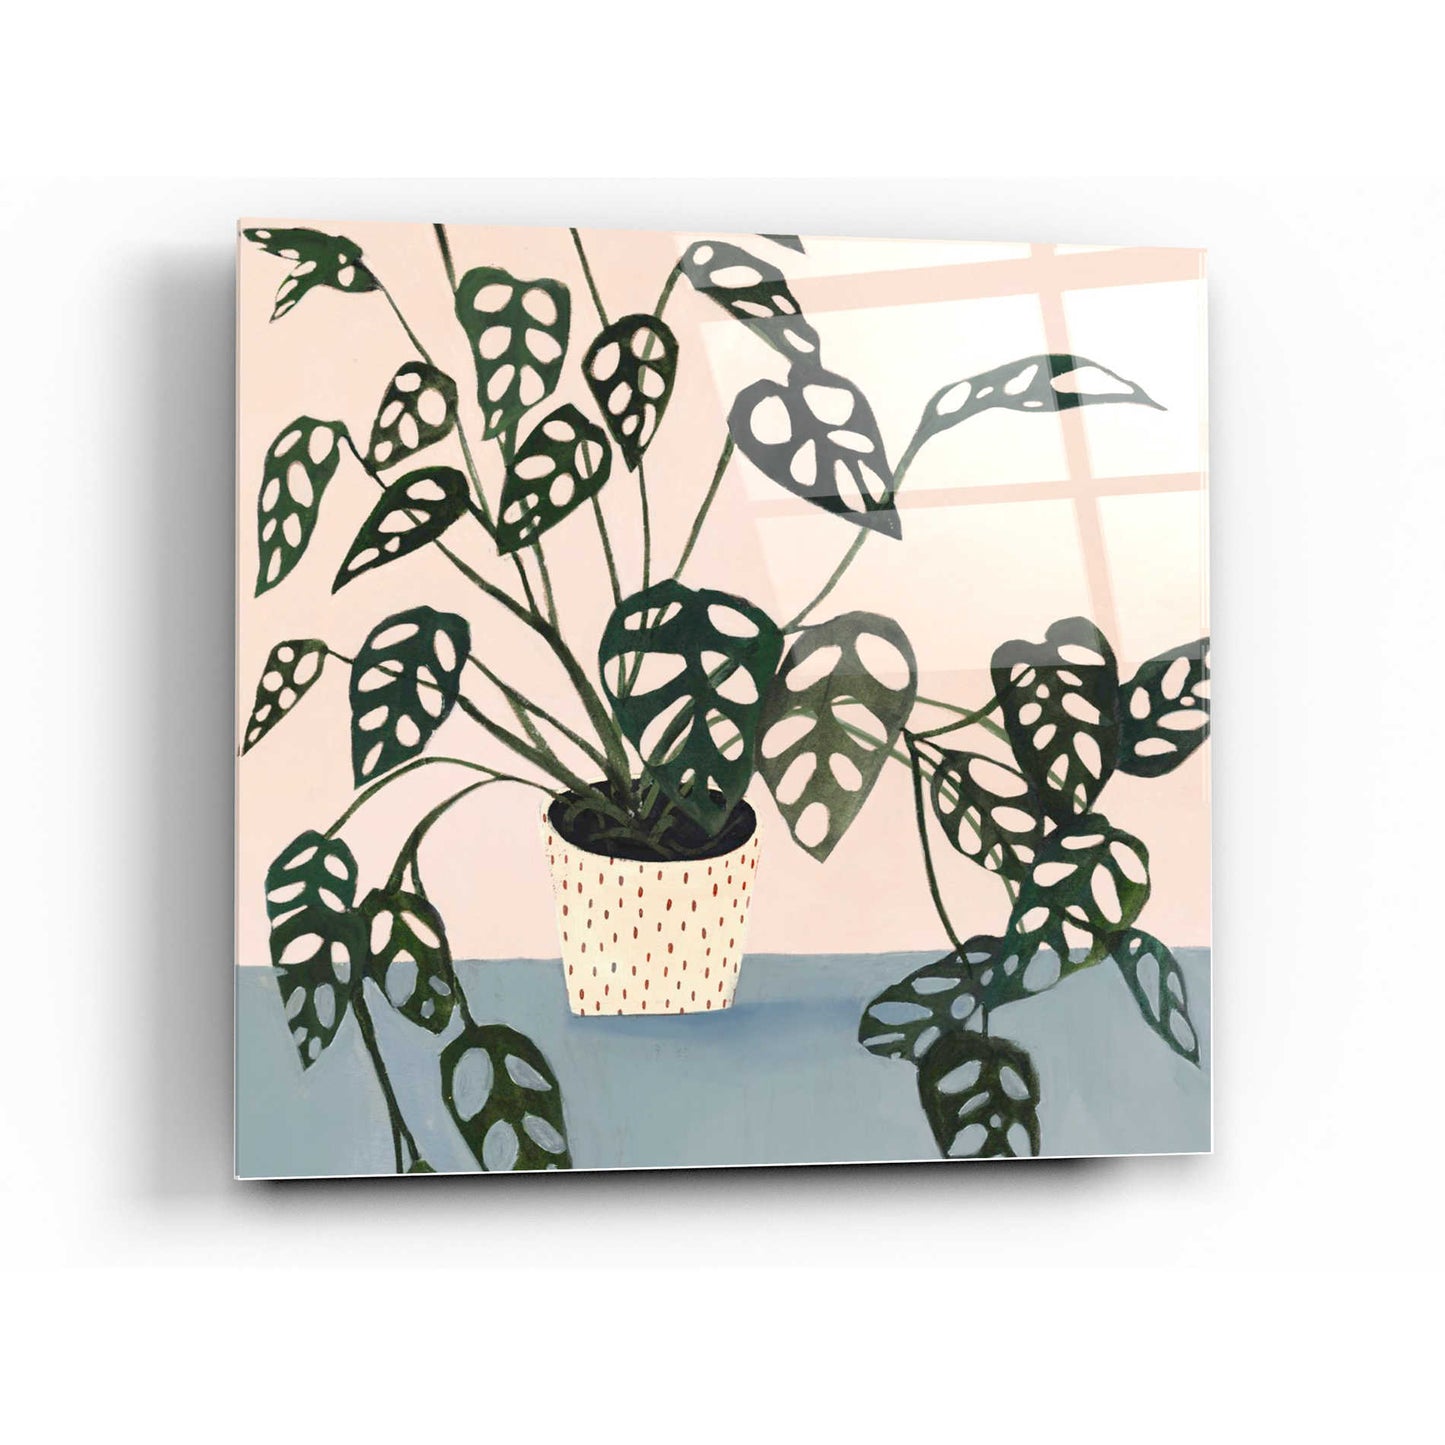 Epic Art 'Houseplant I' by Victoria Borges Acrylic Glass Wall Art,24x24